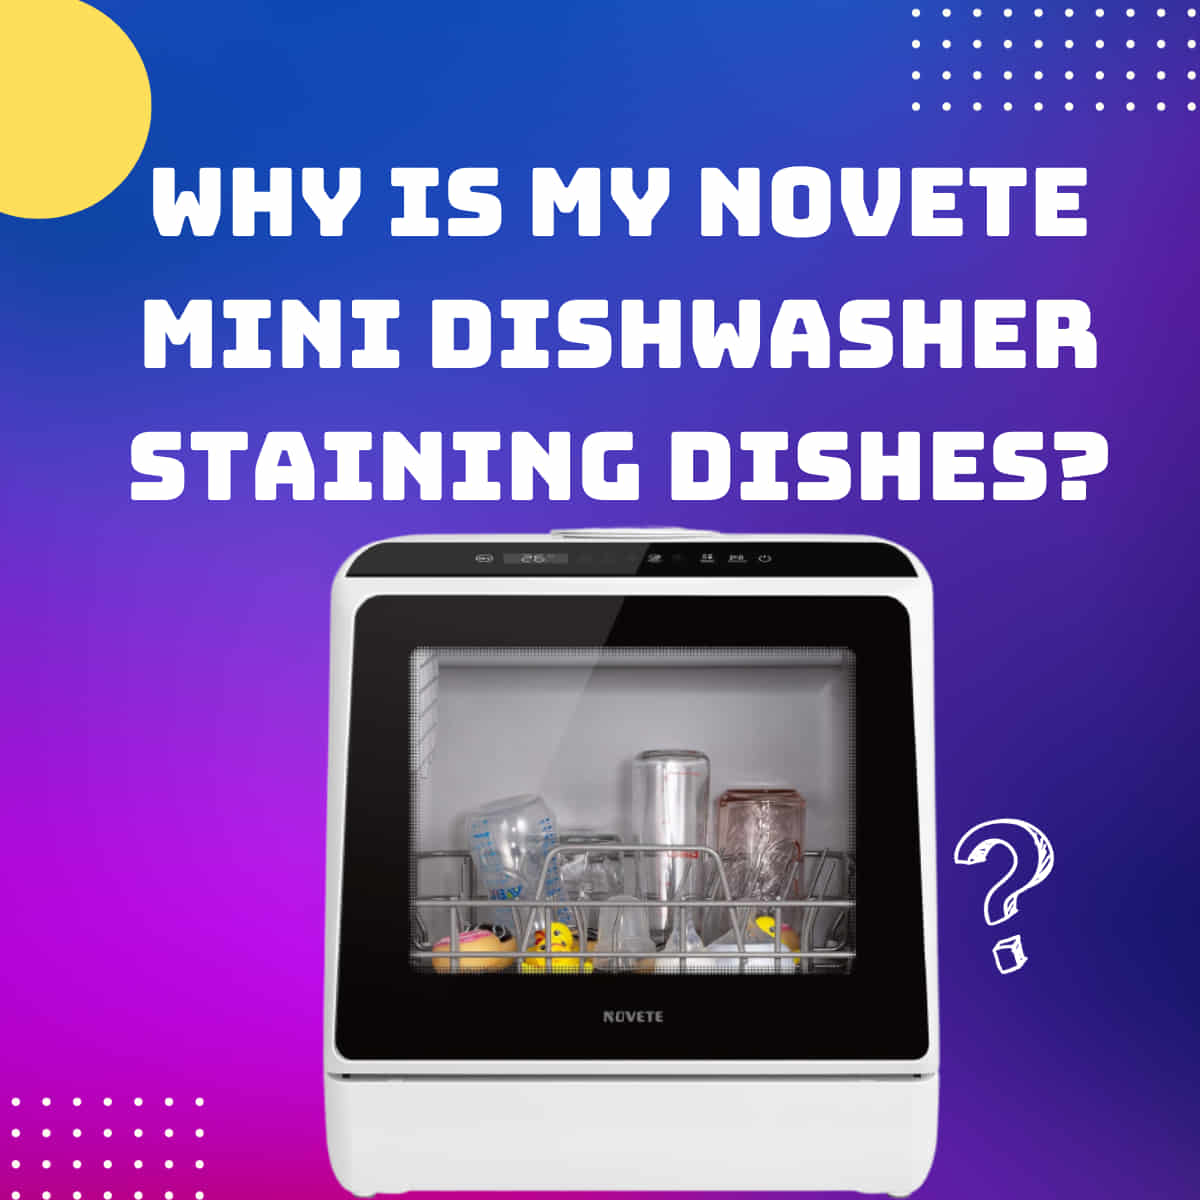 Why is my novete mini dishwasher staining dishes